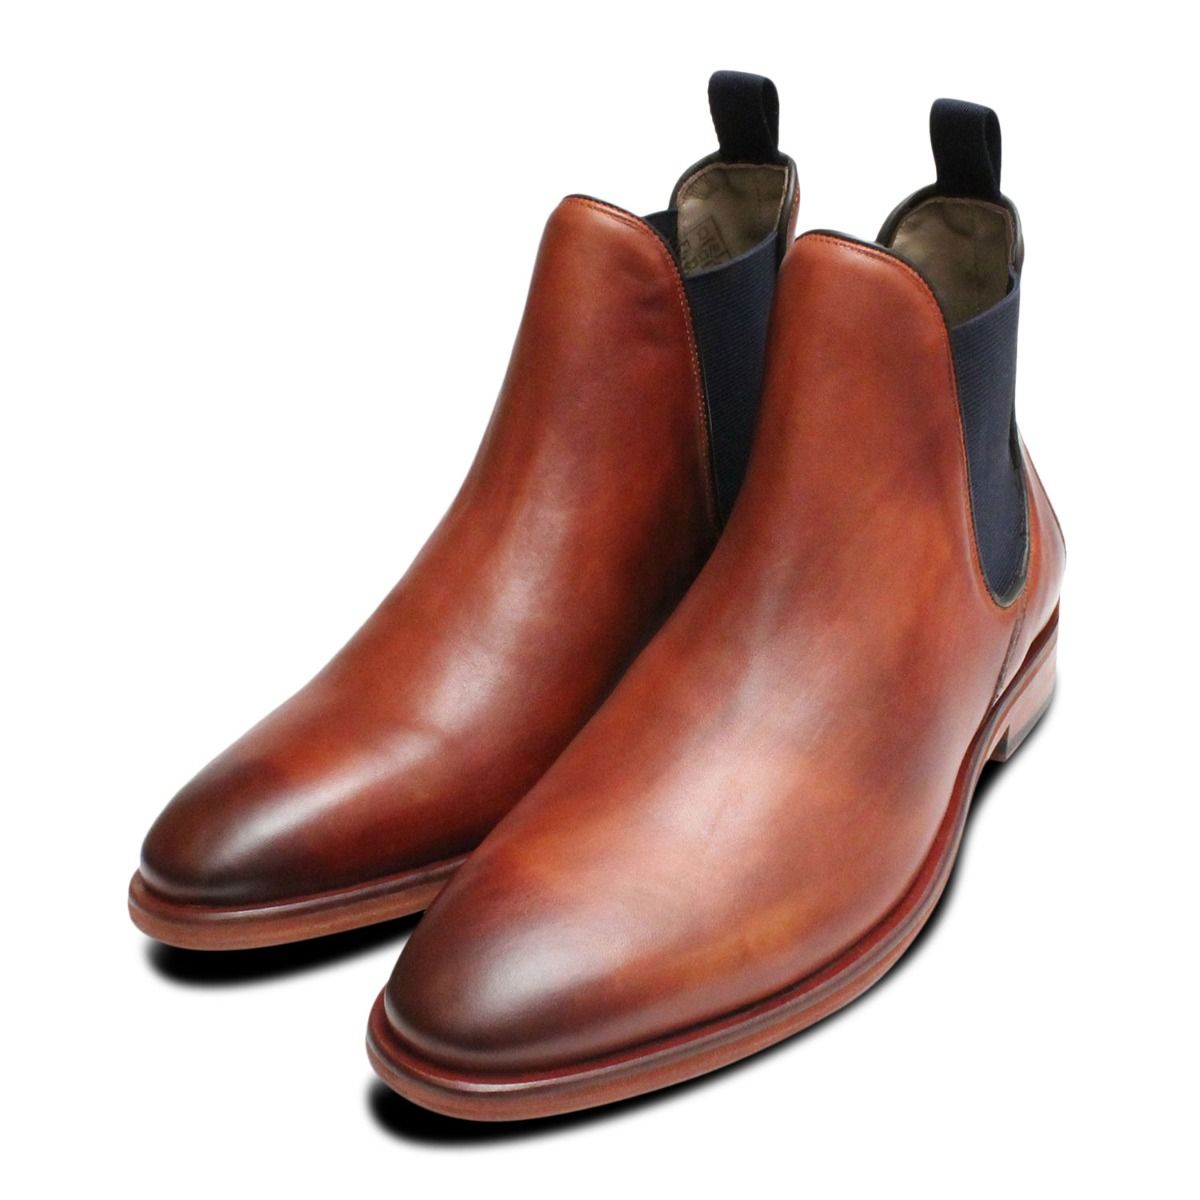 oliver sweeney chelsea boots sale